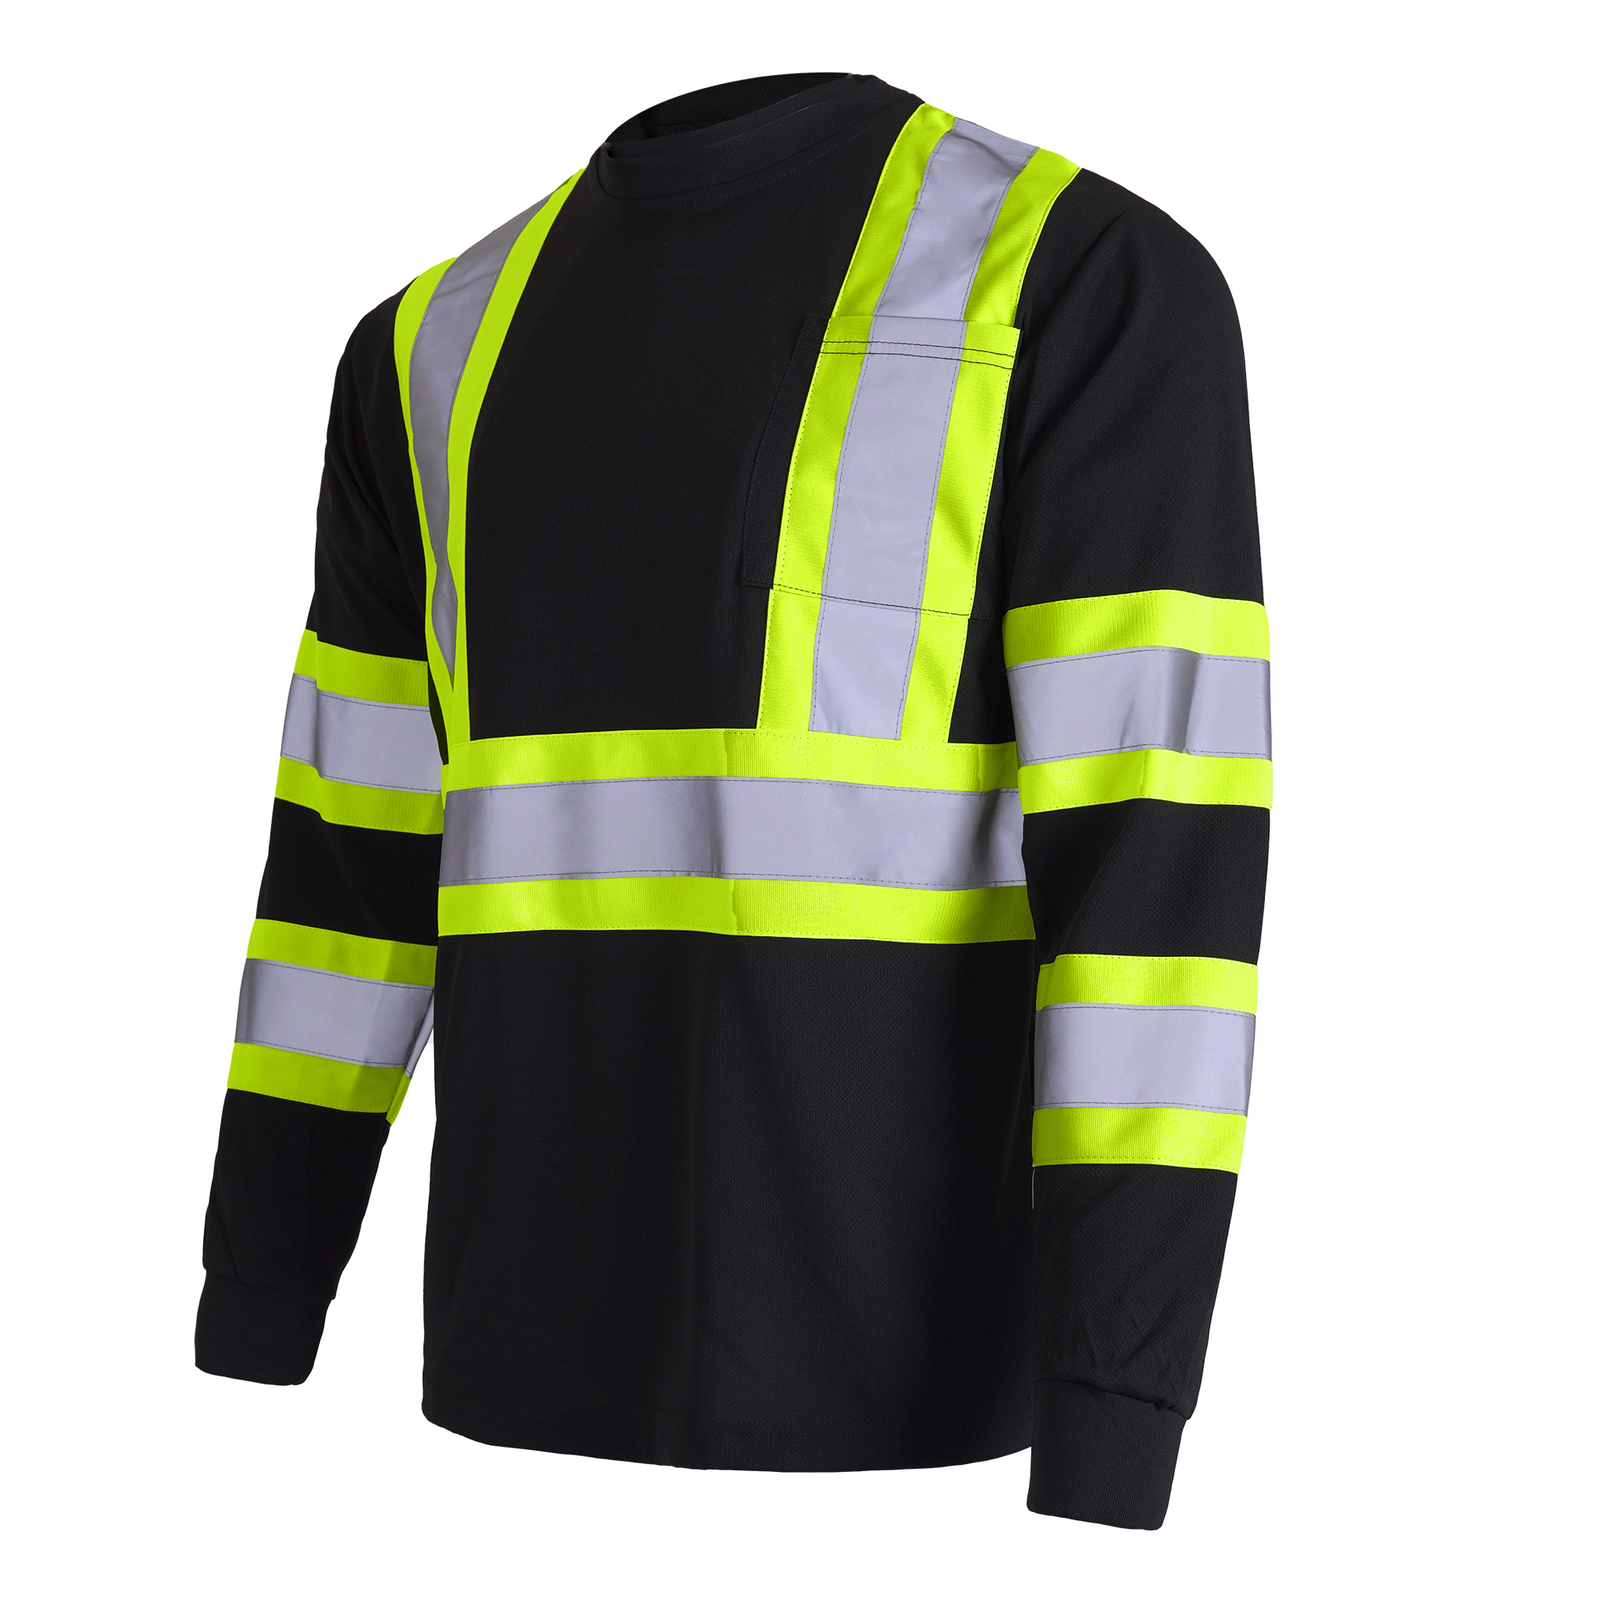 Diagonal view of the JORESTECH Hi-vis reflective two tone long sleeve safety black and yellow pocket shirt